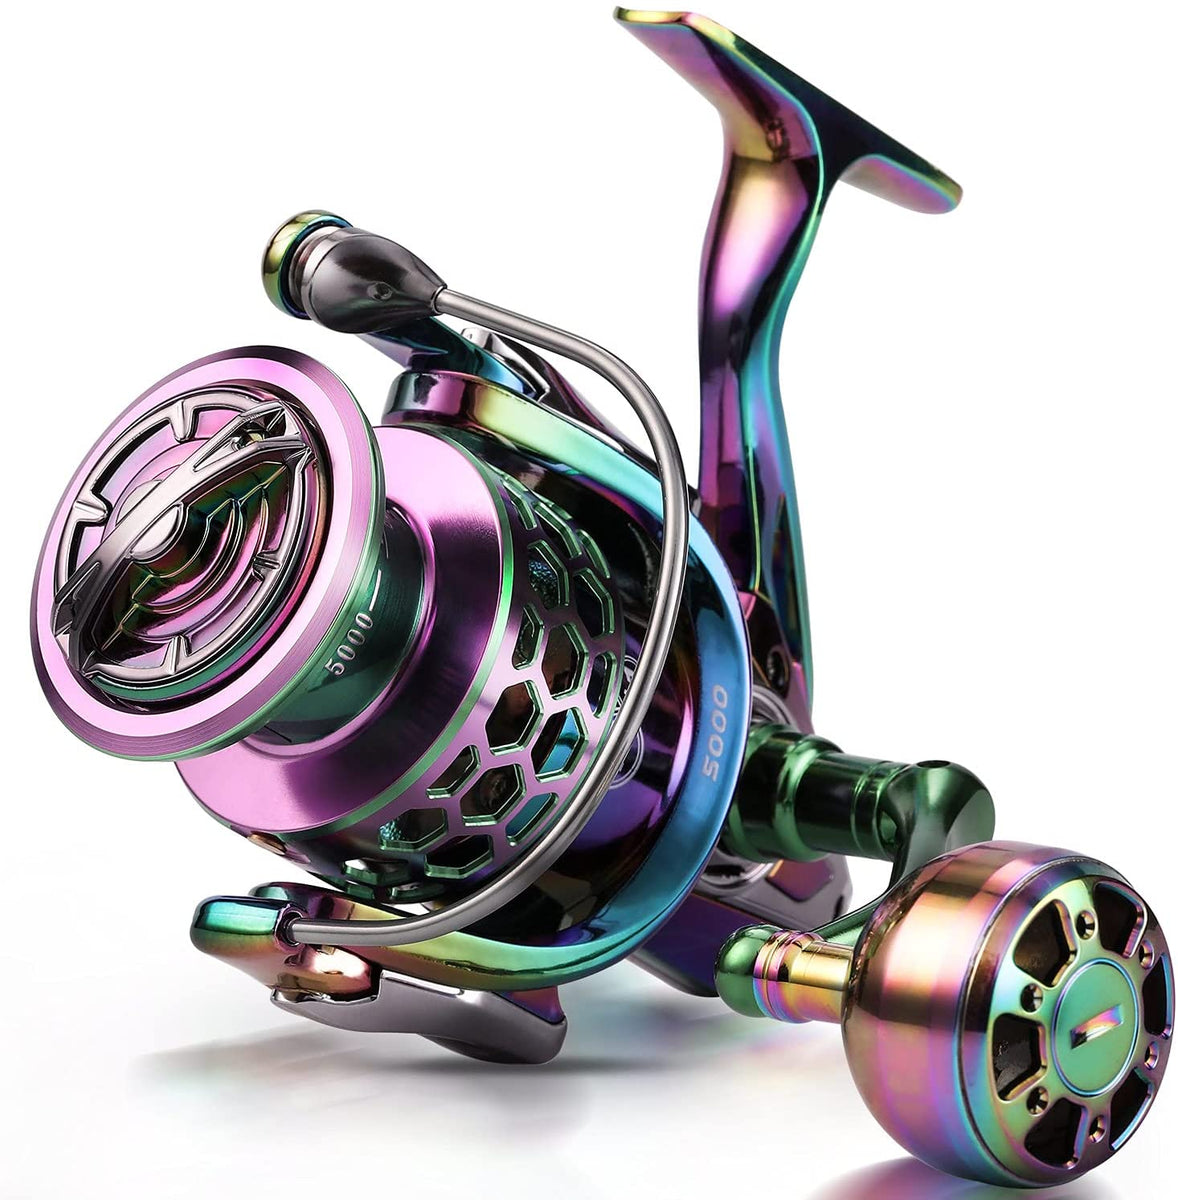 Sougayilang Fishing Reel, Colorful Aluminum Frame Spinning Reels with